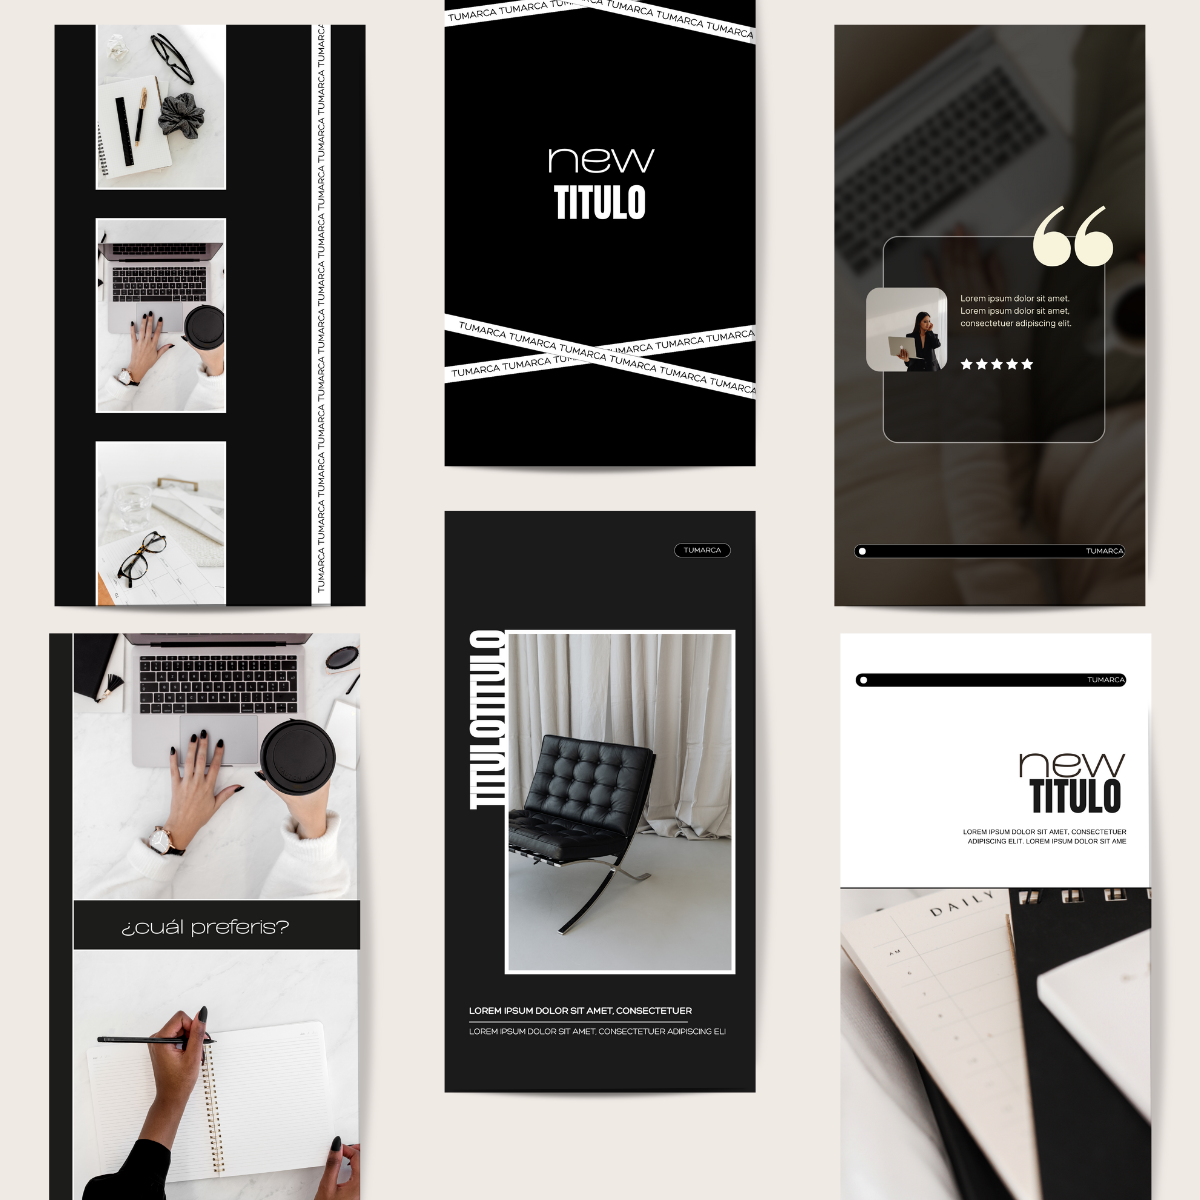 Pack PRO BOSS templates para redes sociales